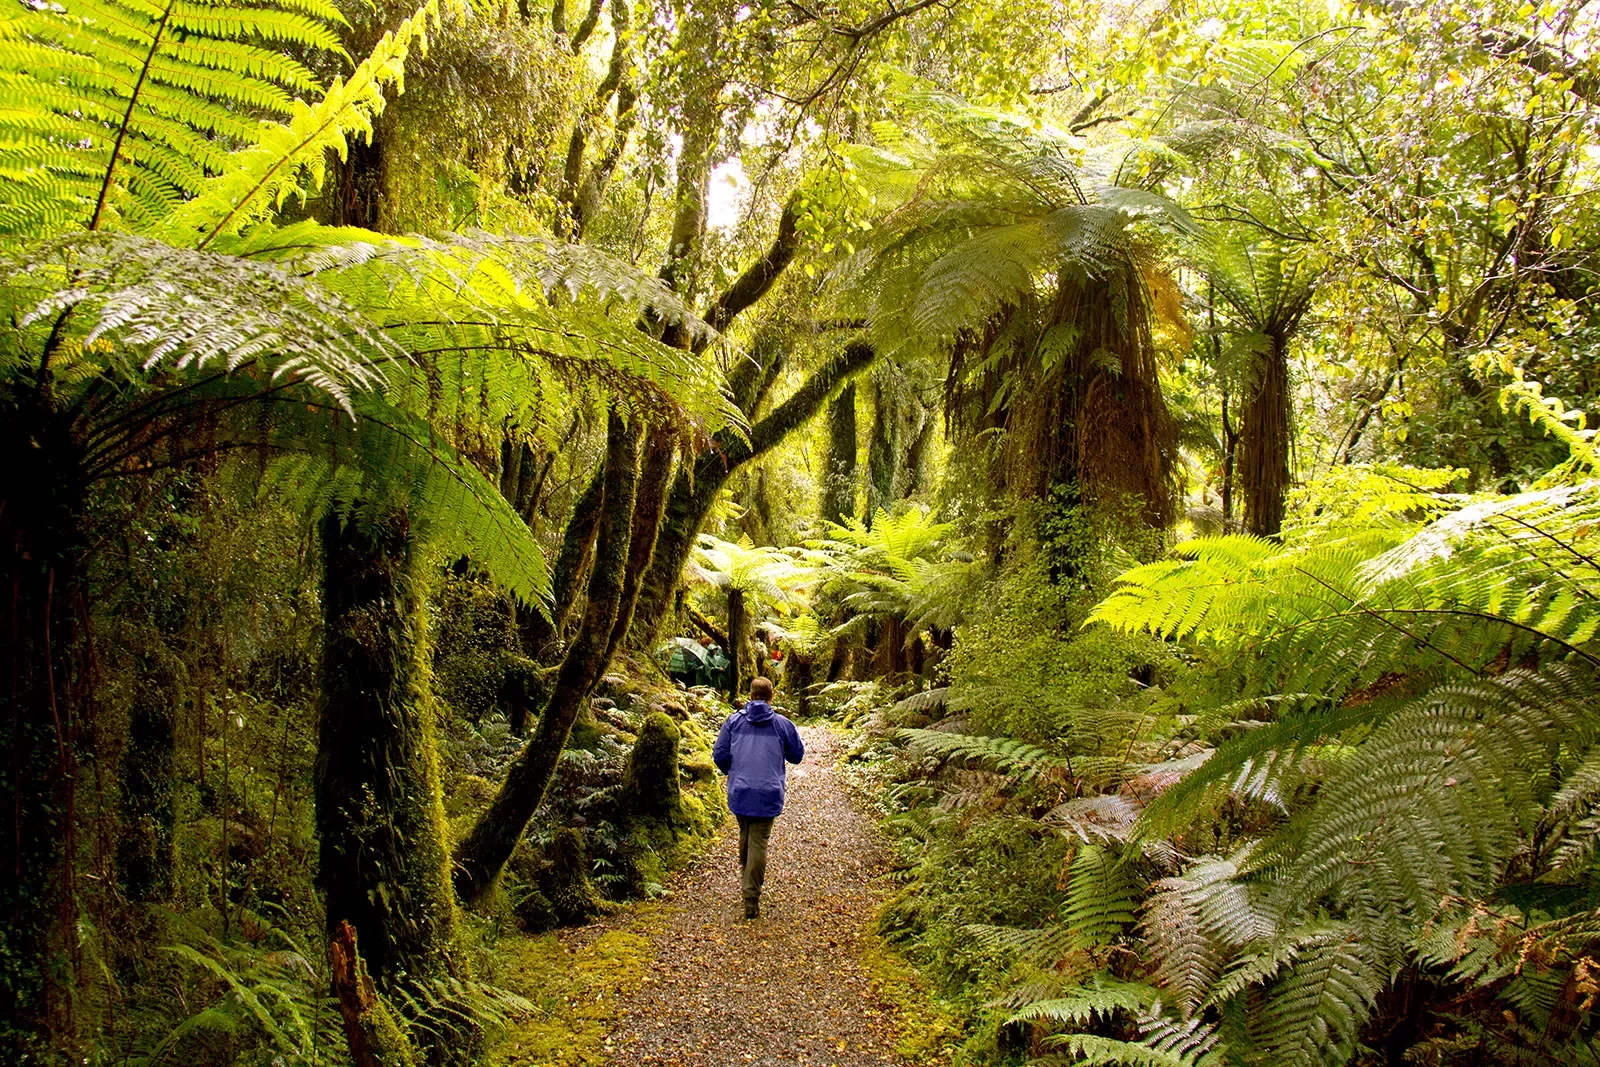 Guest walking down lush forest pathway.